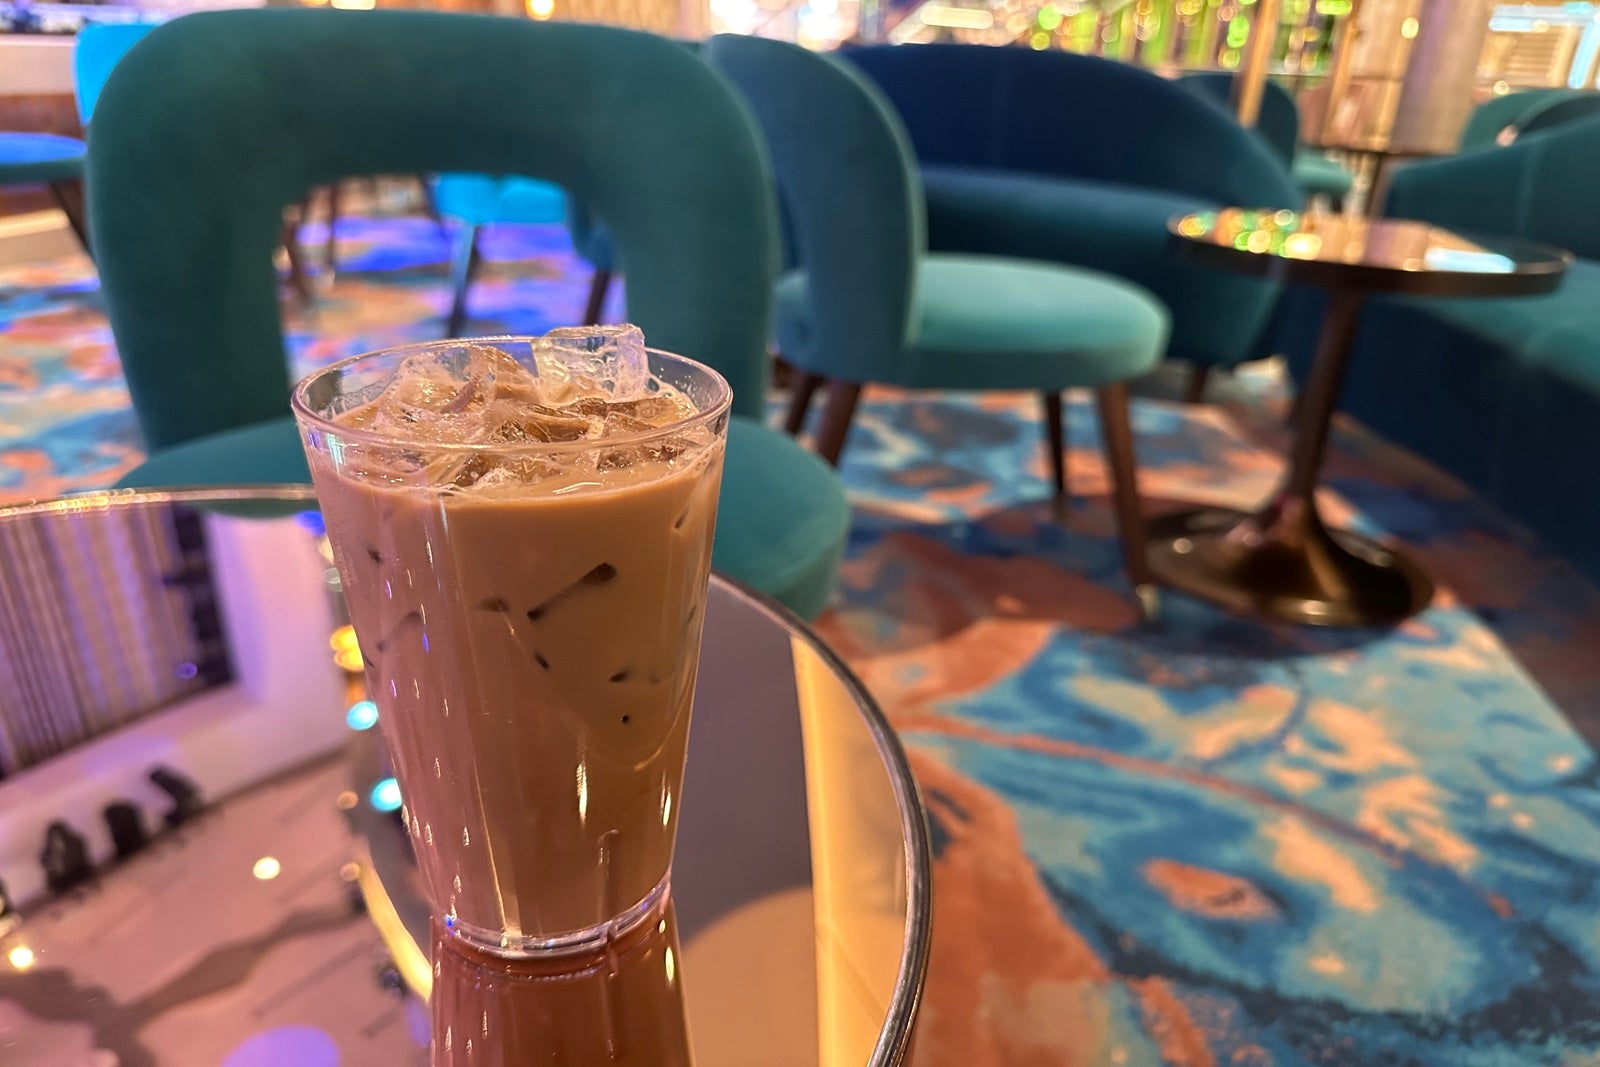 An iced coffee sitting on a table with teal chairs in the background